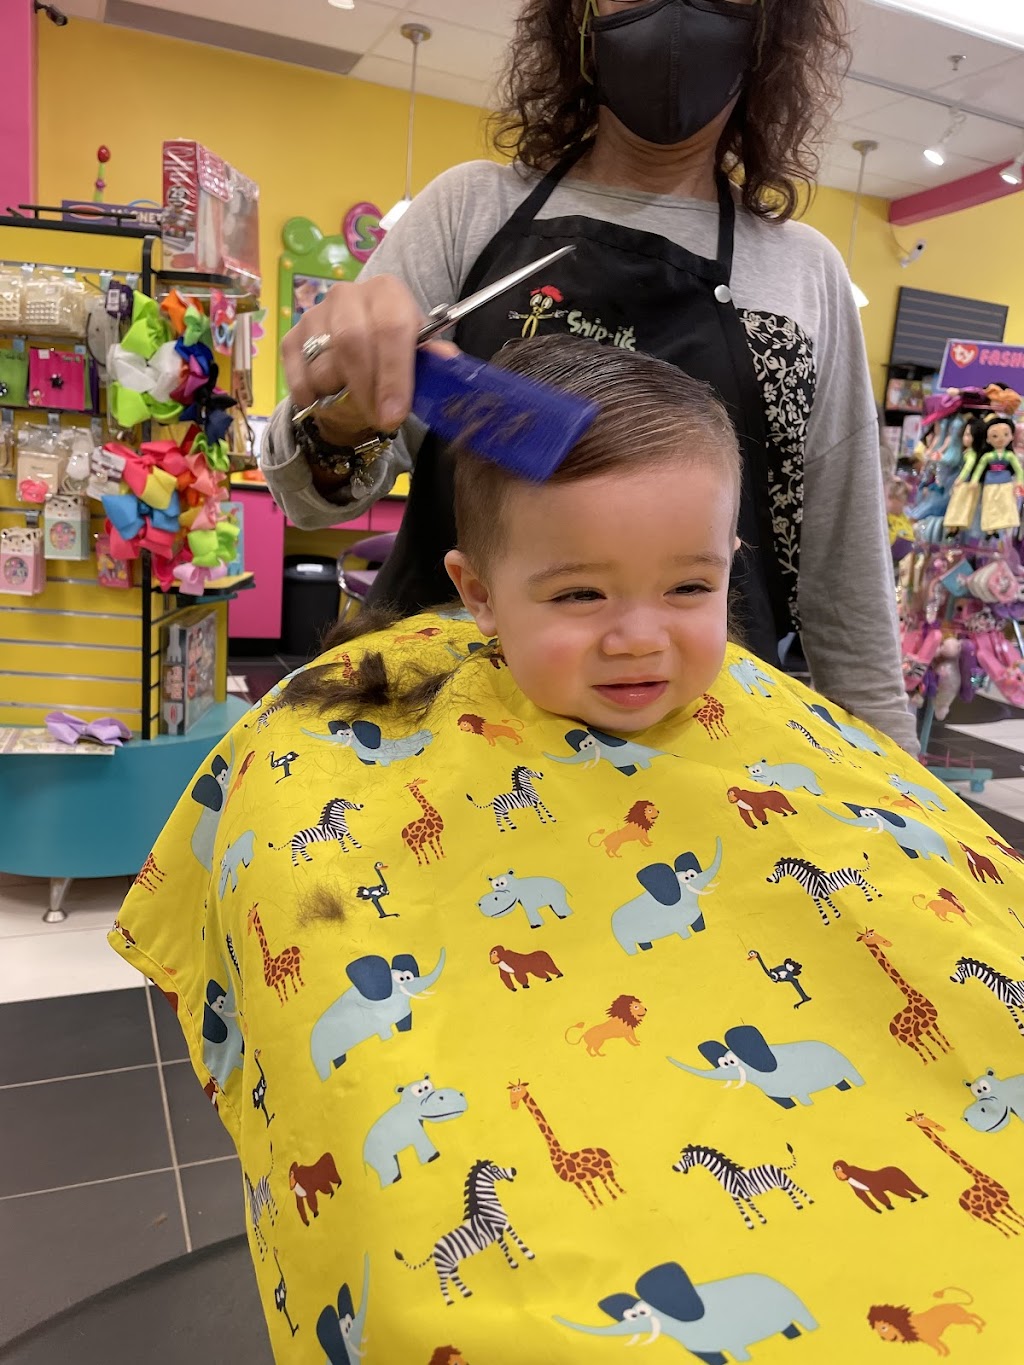 Snip-its Haircuts for Kids | 1966 Jericho Turnpike, East Northport, NY 11731 | Phone: (631) 486-7477